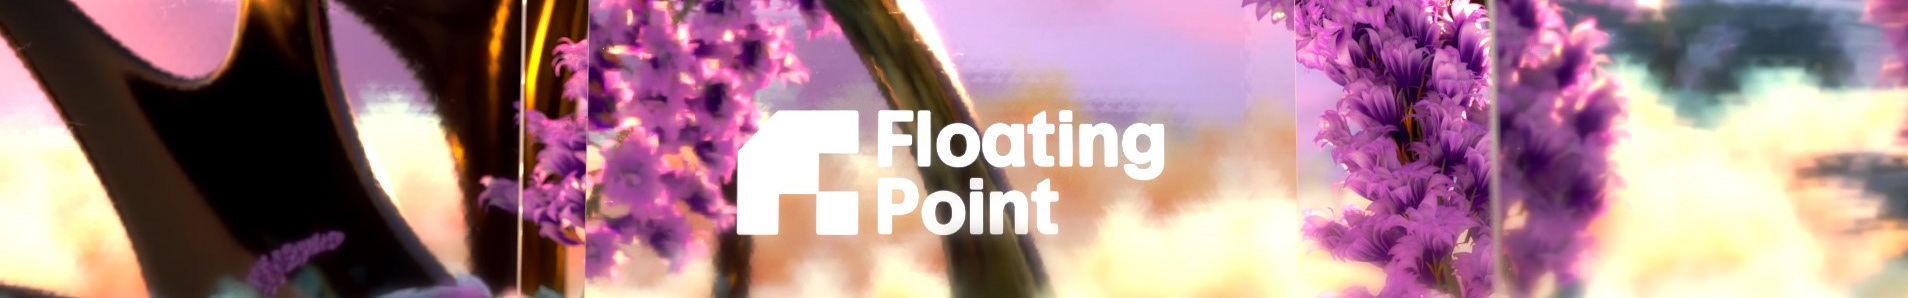 Floating Point Studio's profile banner